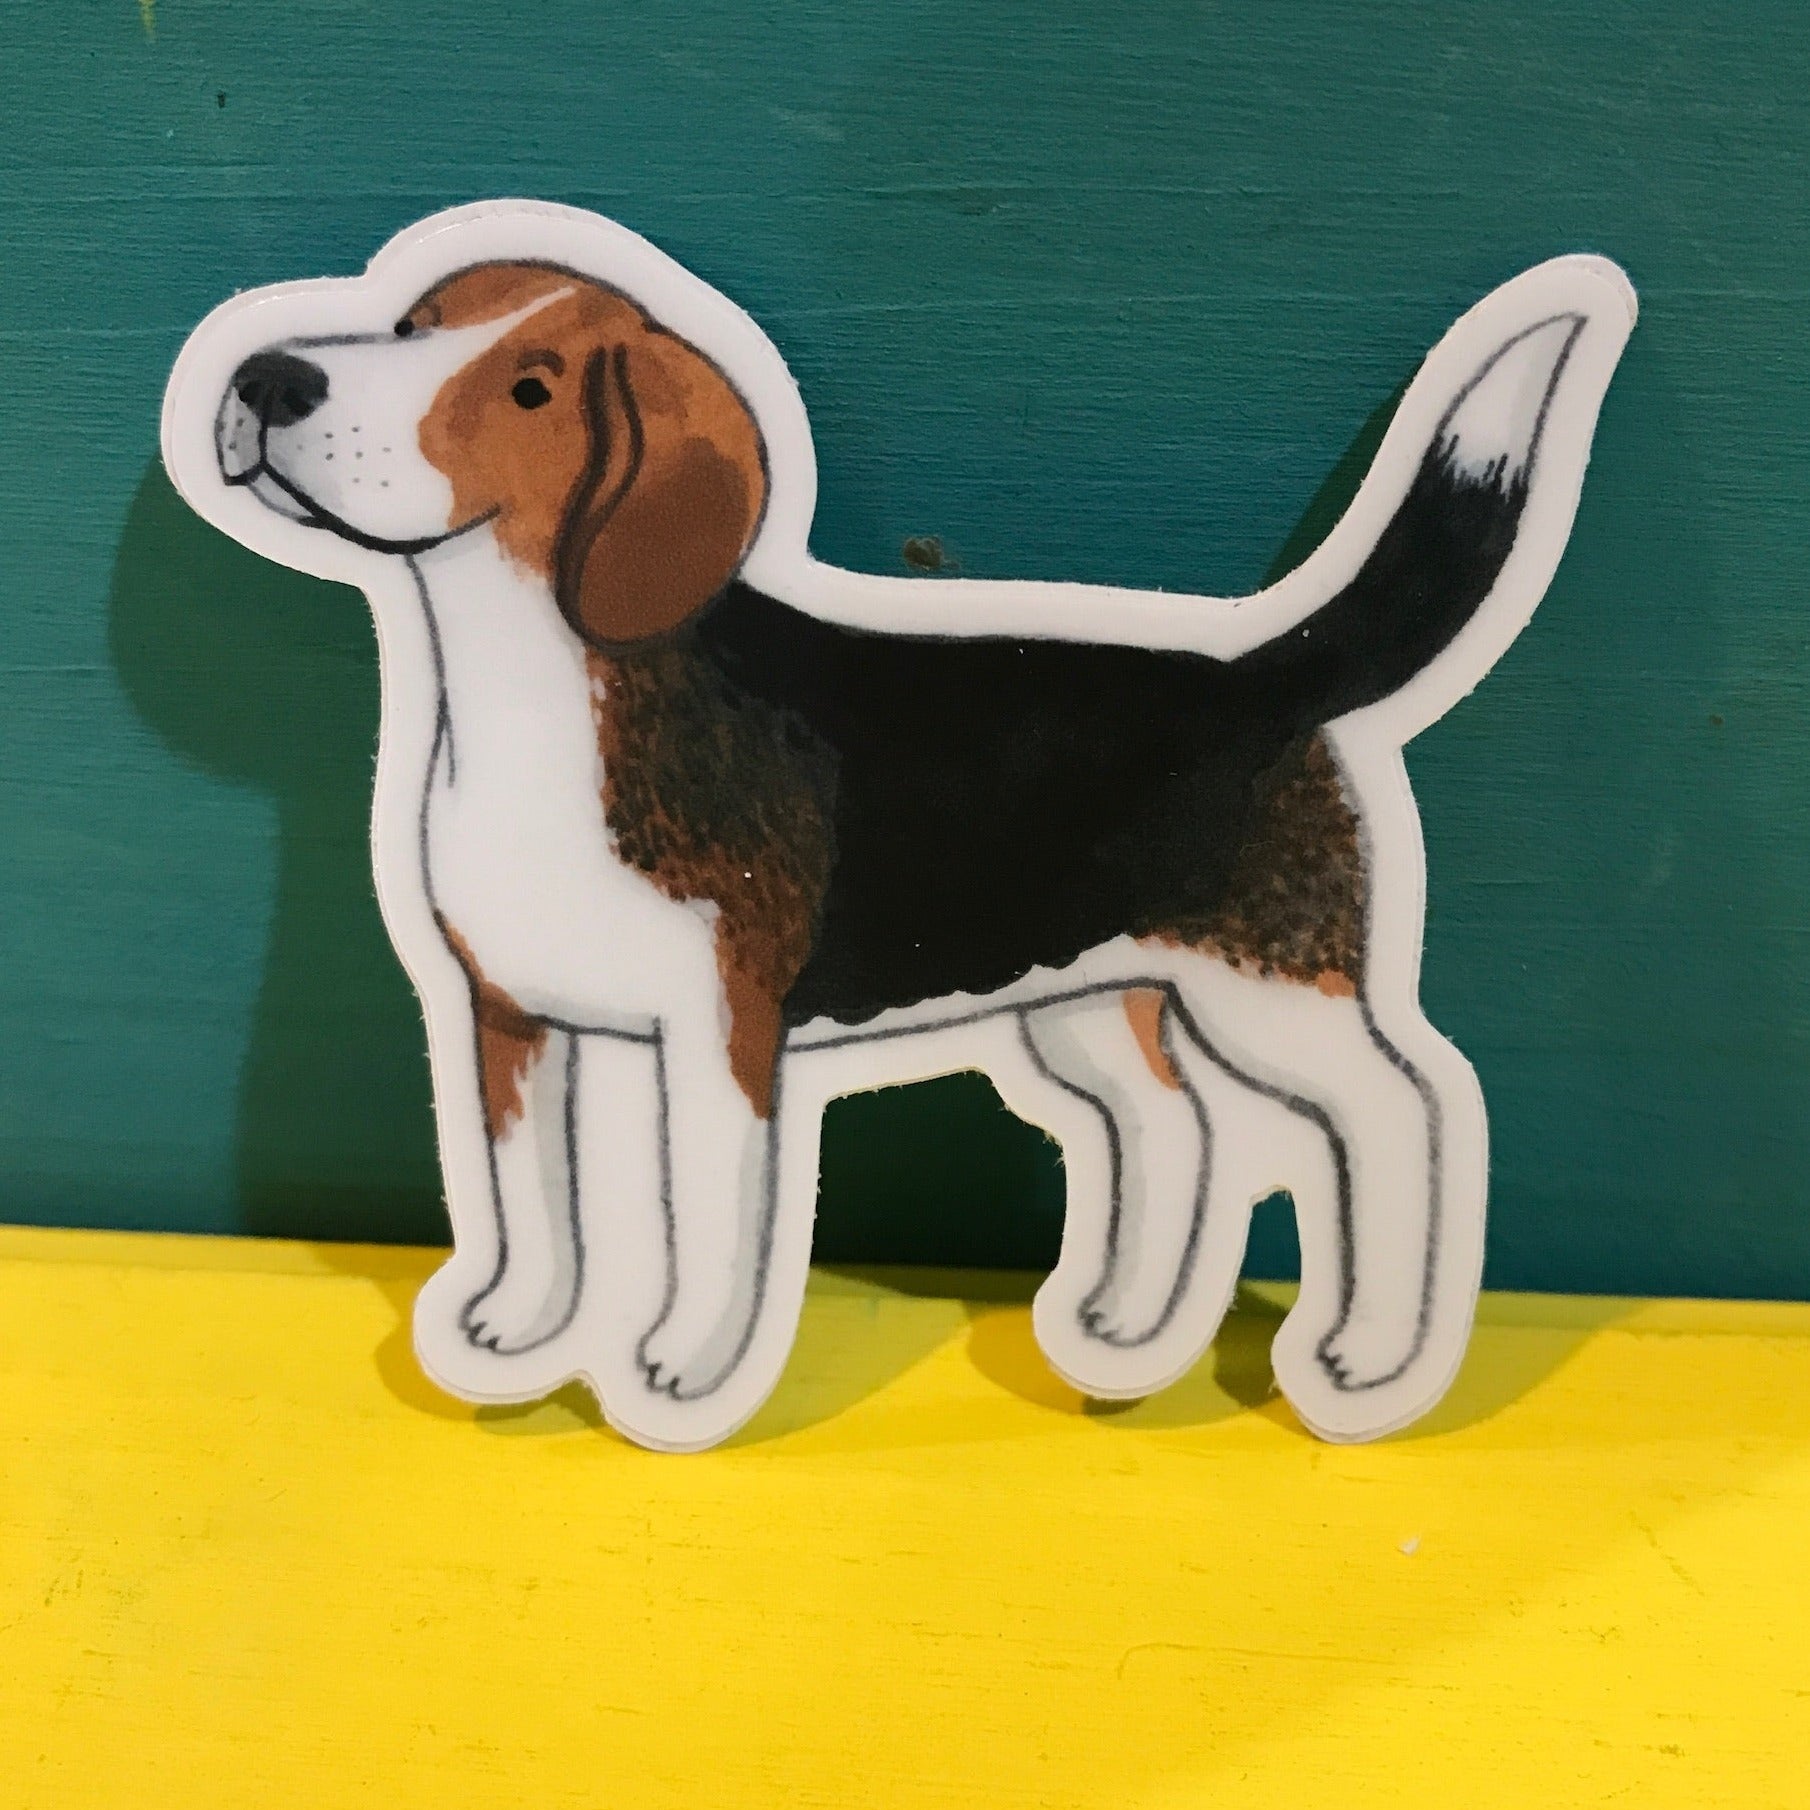 Watercolor illustration of a Beagle dog in sticker form. It's standing up against a yellow and teal background.